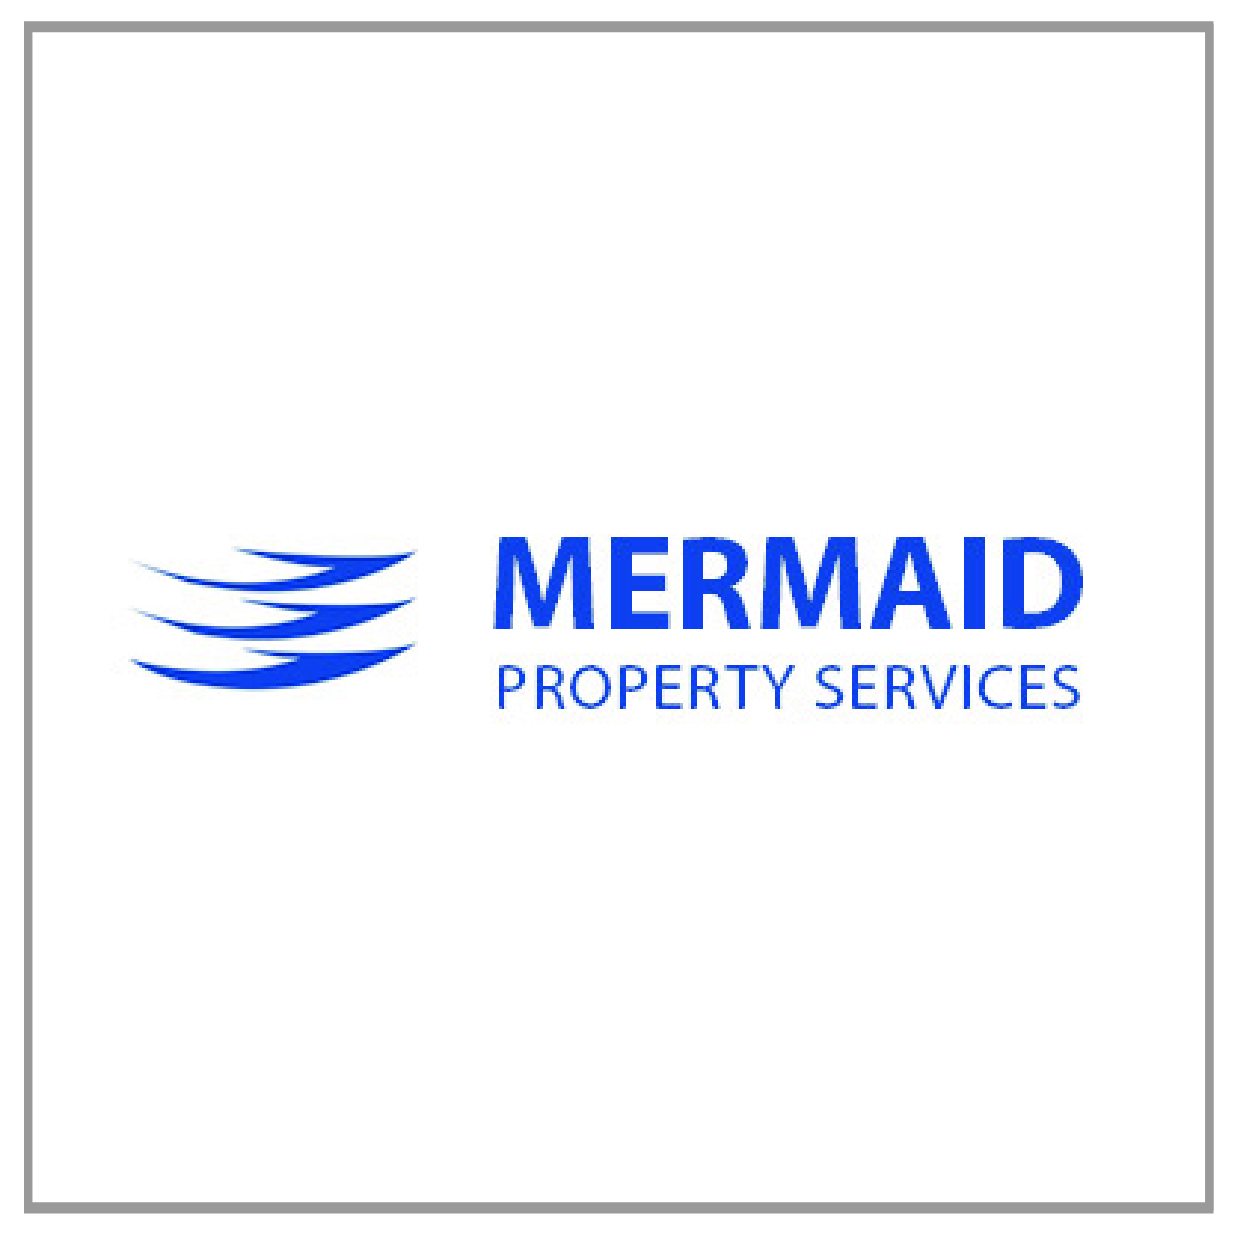 mermaid-property-services